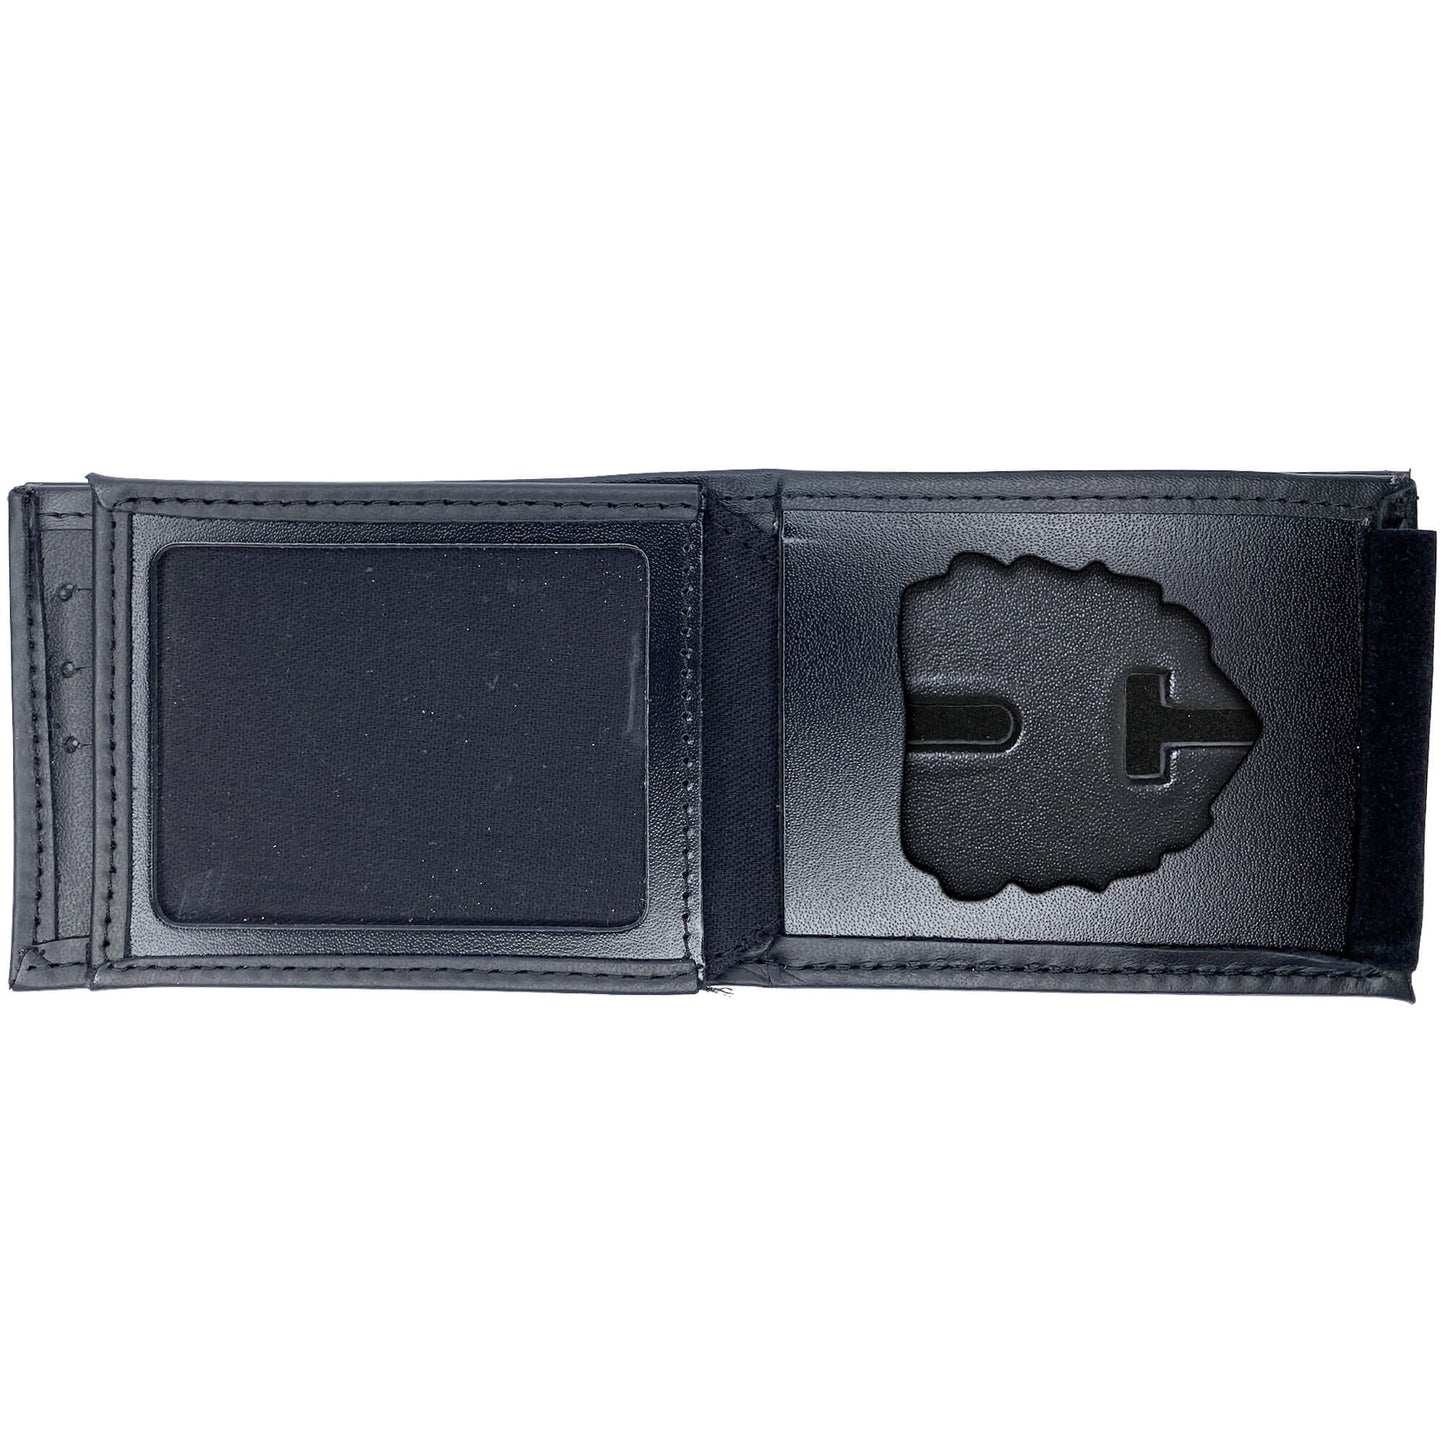 Calgary Transit Peace Officer Hidden Badge Wallet-Perfect Fit-911 Duty Gear Canada